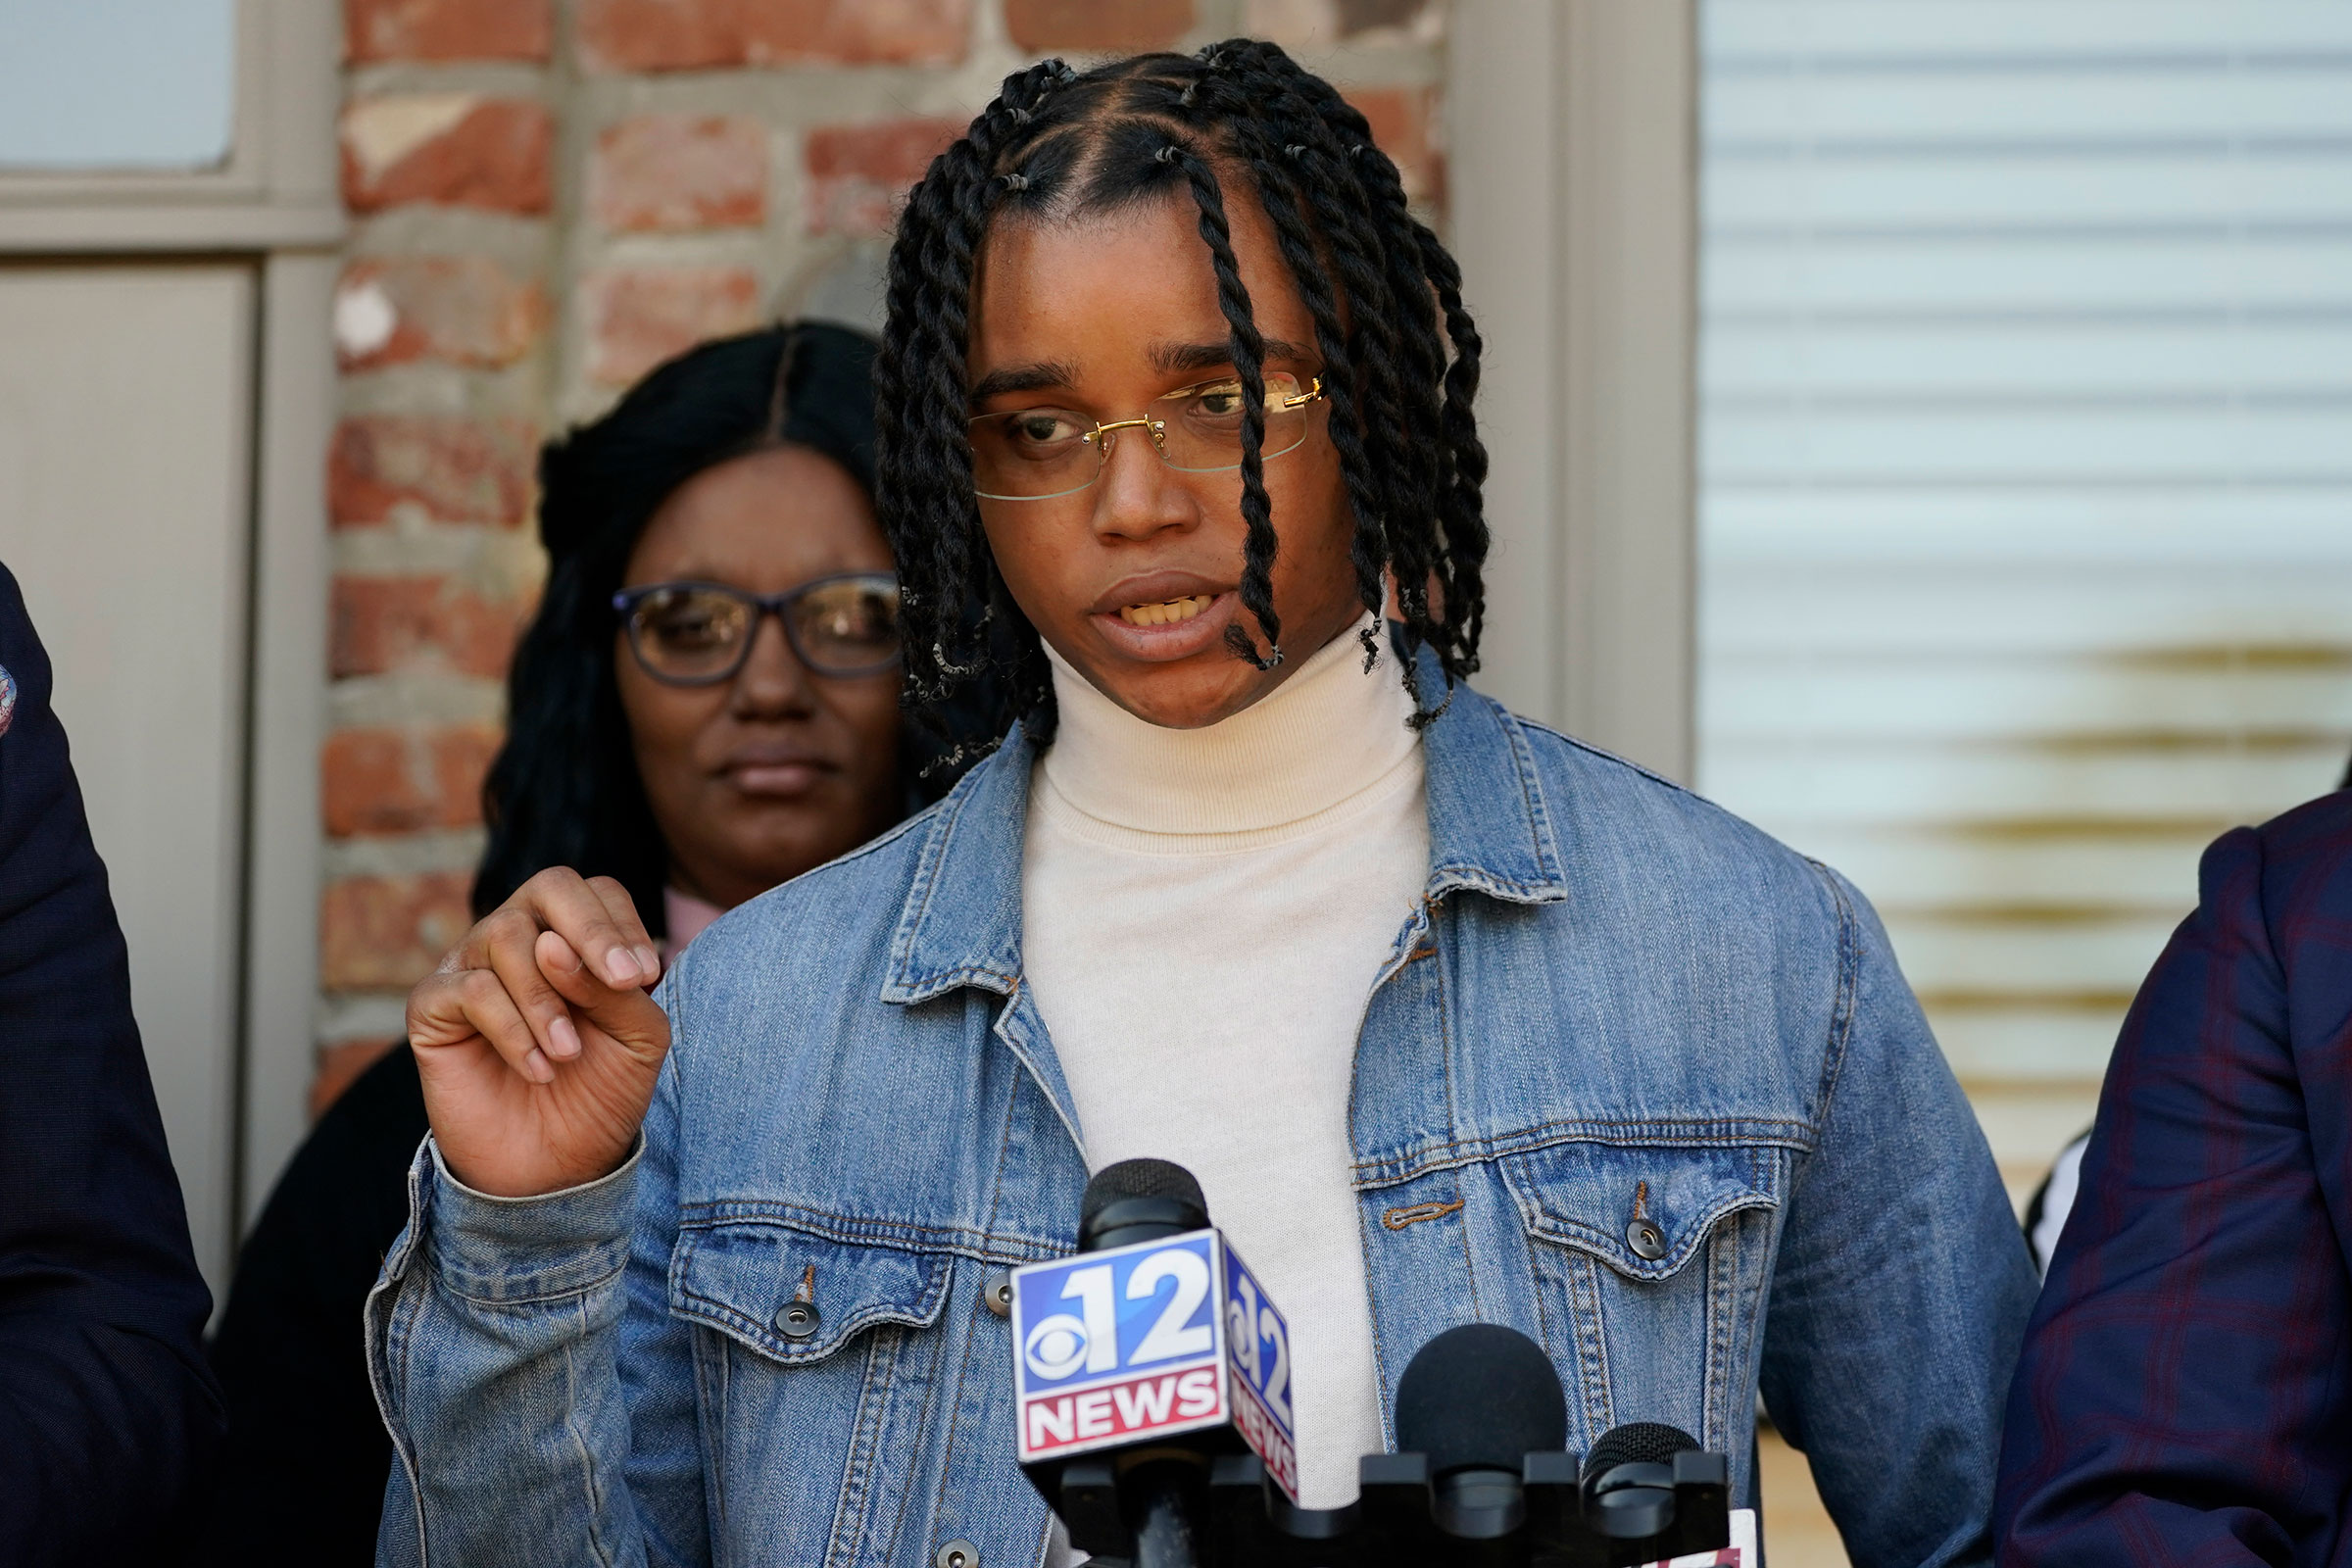 FedEx driver D’Monterrio Gibson speaks about his recent experience where he says he was fired upon and chased by a white father and son while delivering packages on his route in Brookhaven, at a news conference in Ridgeland, Miss., on Feb. 10, 2022. (Rogelio V. Solis—AP)